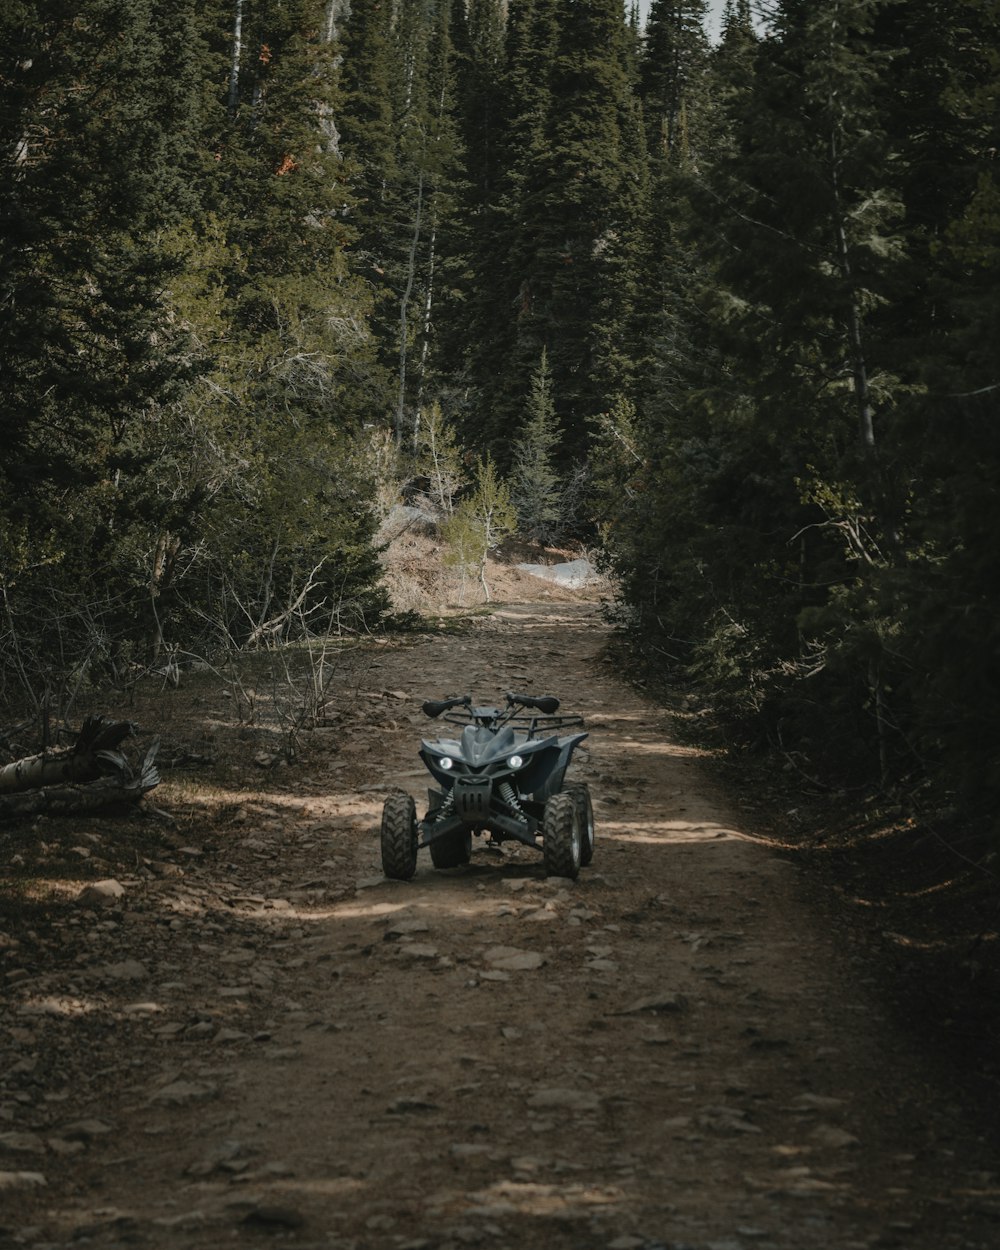 black and gray motorcycle on brown dirt road during daytime